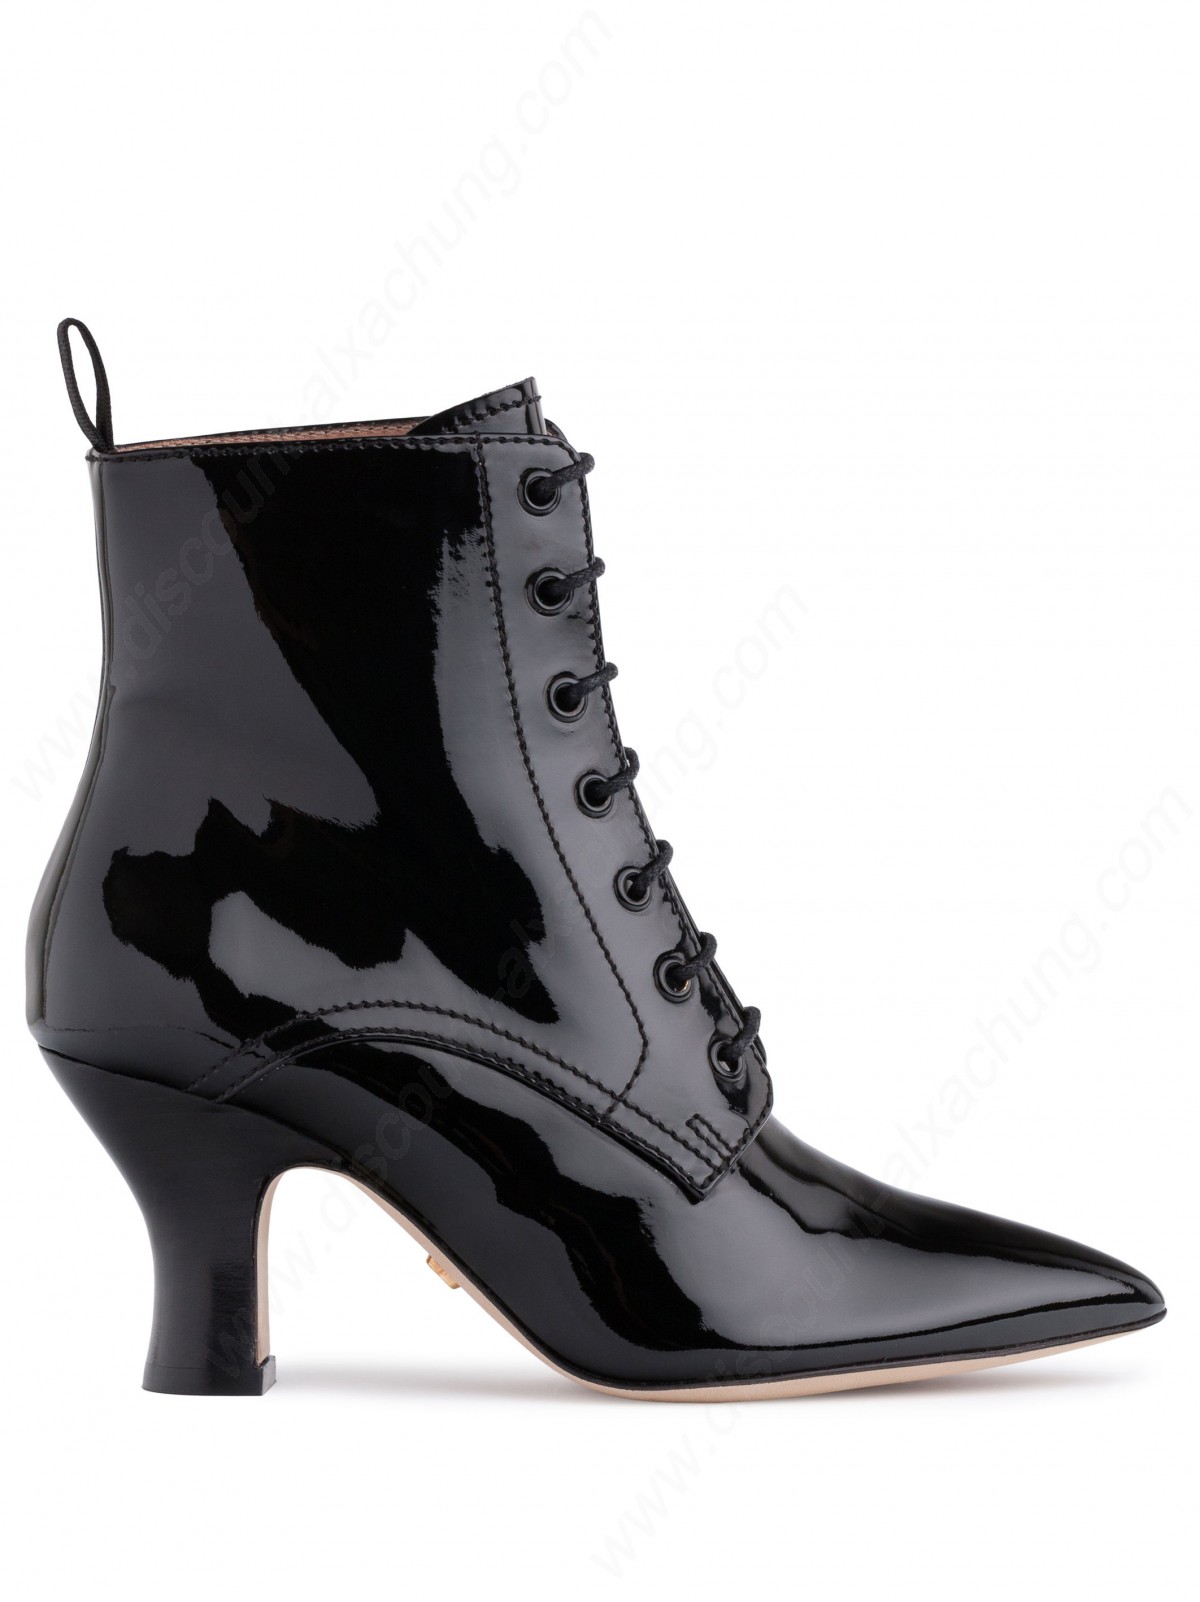 Alexachung Black Victorian Lace Up Boot - -0